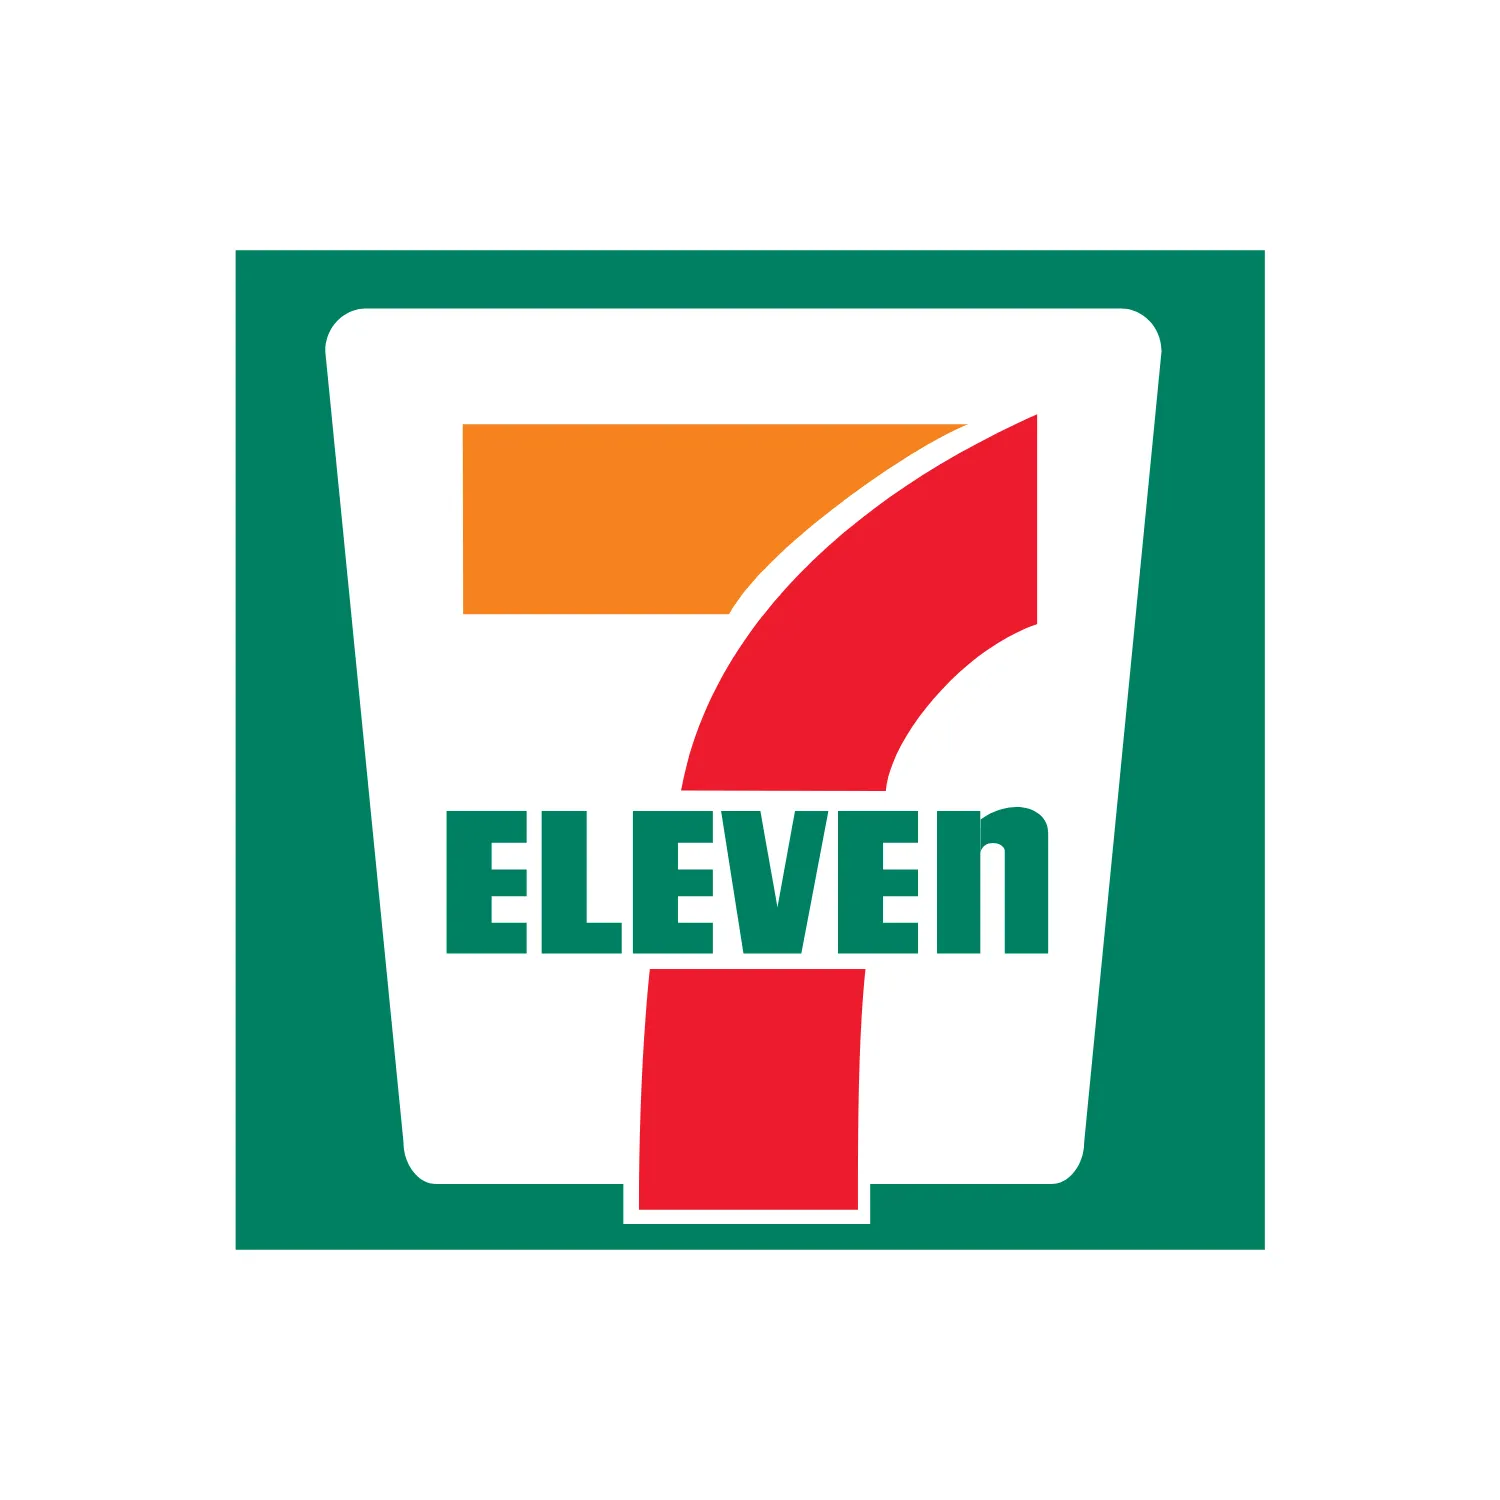 Database of 7-Eleven Locations in the United States